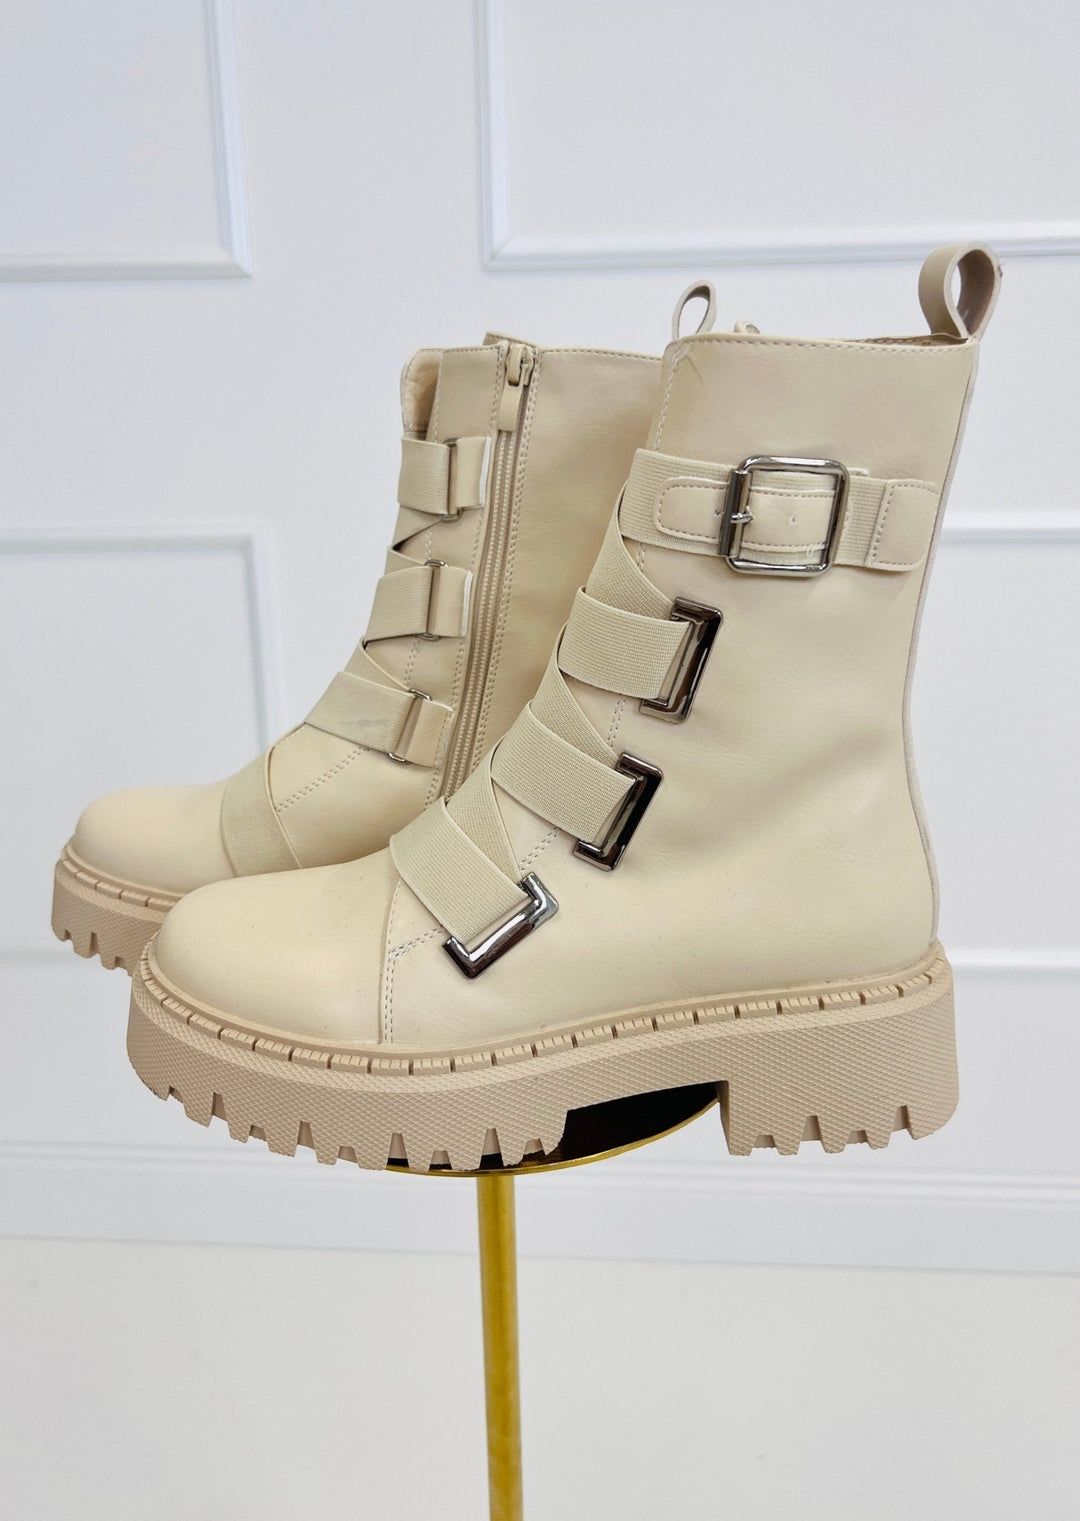 2. Wahl Boots Creme 2309283